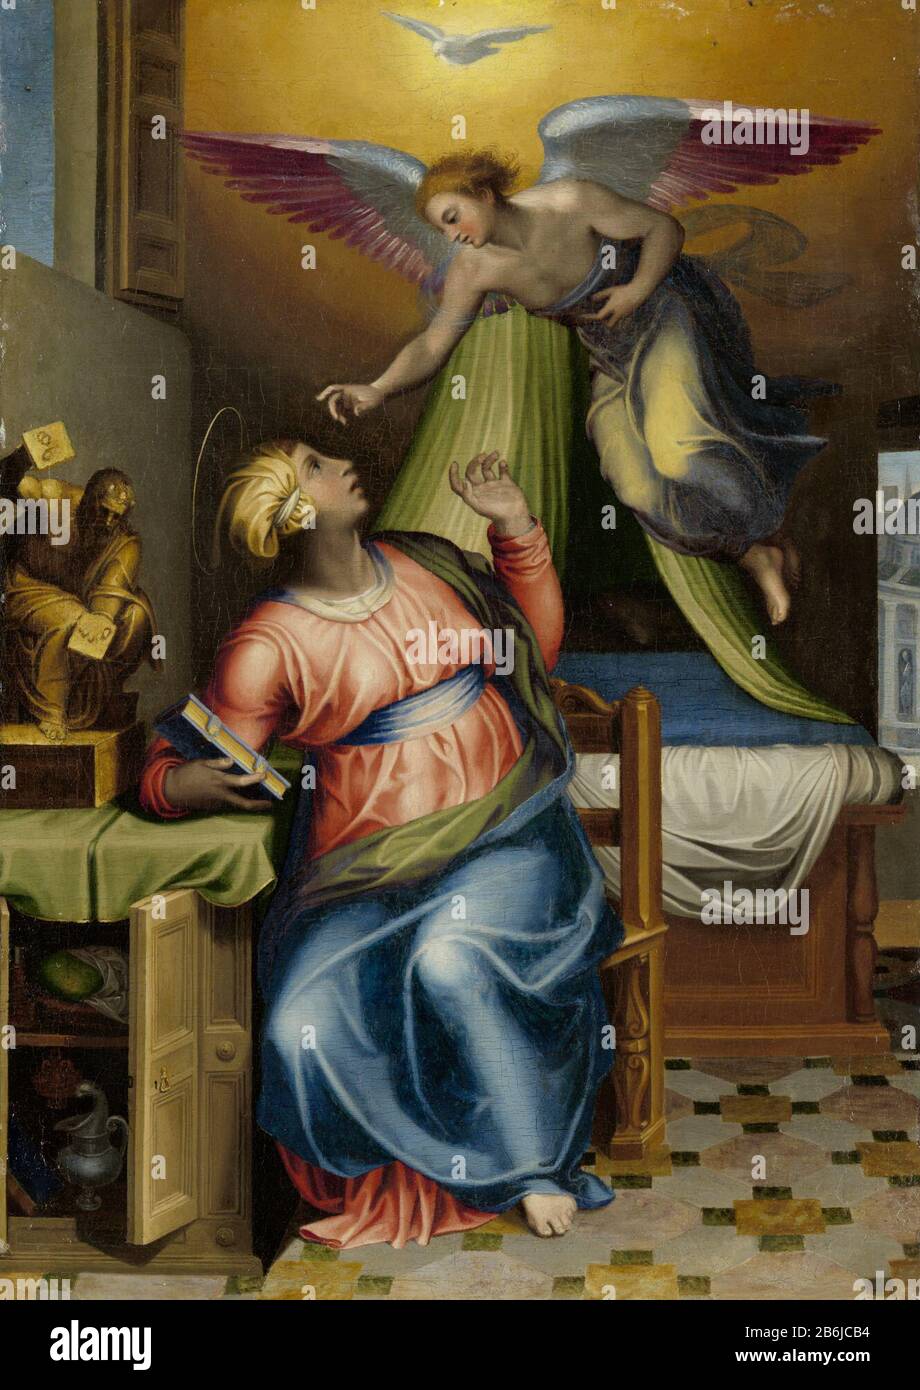 The Annunciation, SK-A-3443 The Annunciation. Mary with book in hand, sitting next to a cabinet with open doors, turns to Angel. Above the angel dove of the Holy Spirit. In the table a picture of which the Moses law tables stukslaat. Manufacturer : painter: Marcello Venusti (near) Date: 1550 - 1570 Physical characteristics: oil on canvas material: cloth oil Dimensions: carrier: h 41.7 cm. B × 30 cm. external dimensions: 8.5 cm d. (Including carrier SK-L-3971.)  Subject: the Annunciation: Mary sitting - AA - Mary to the left, the angel to the right Stock Photo